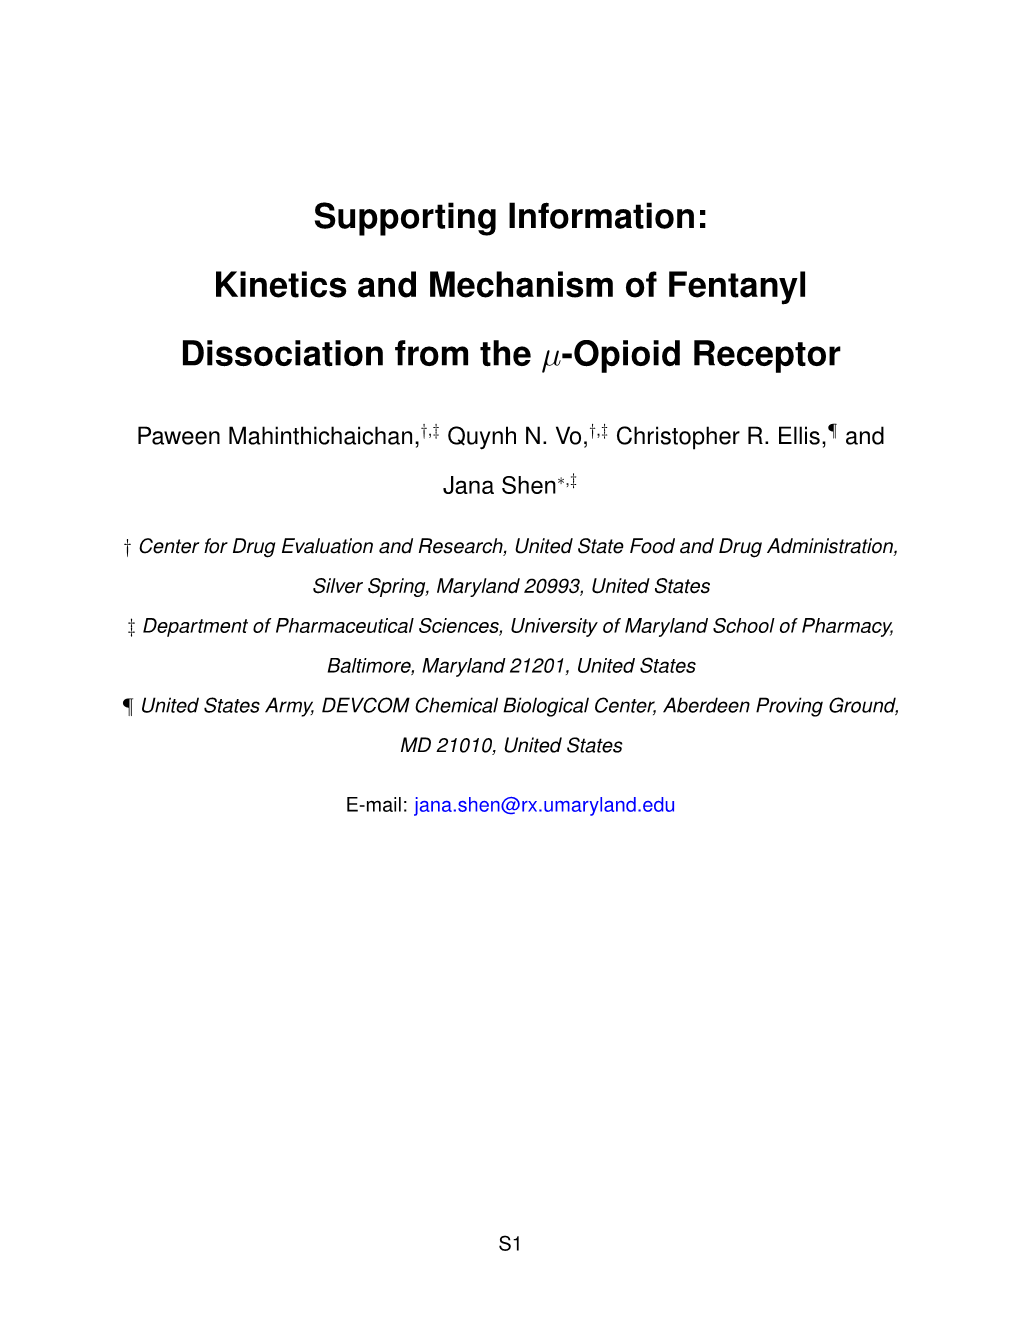 Supporting Information: Kinetics and Mechanism of Fentanyl Dissociation from the Μ-Opioid Receptor